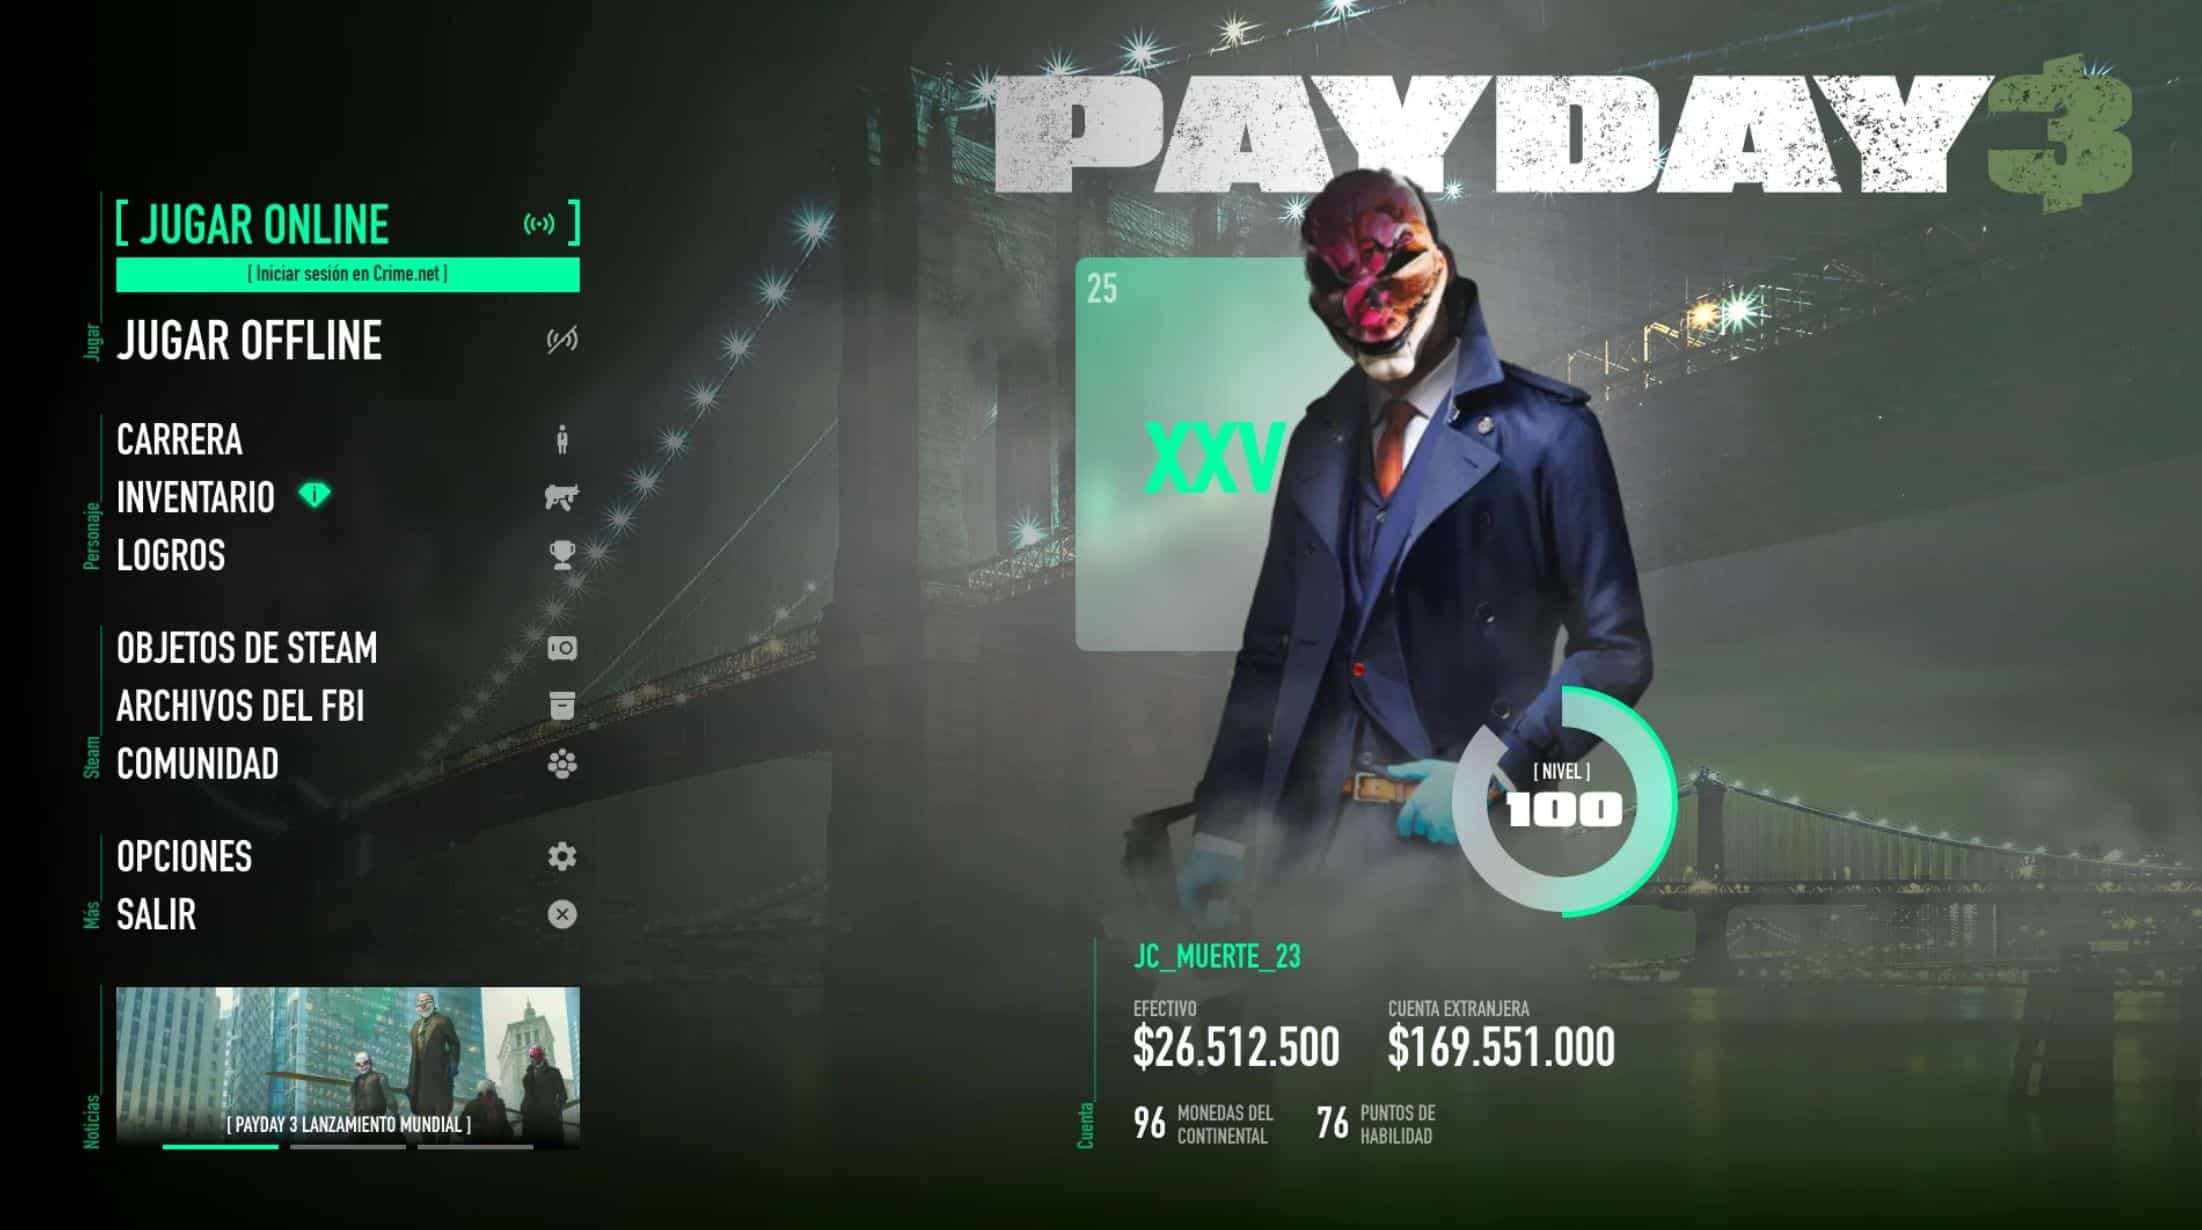 Launch Settings Archives - Payday 3 Mods